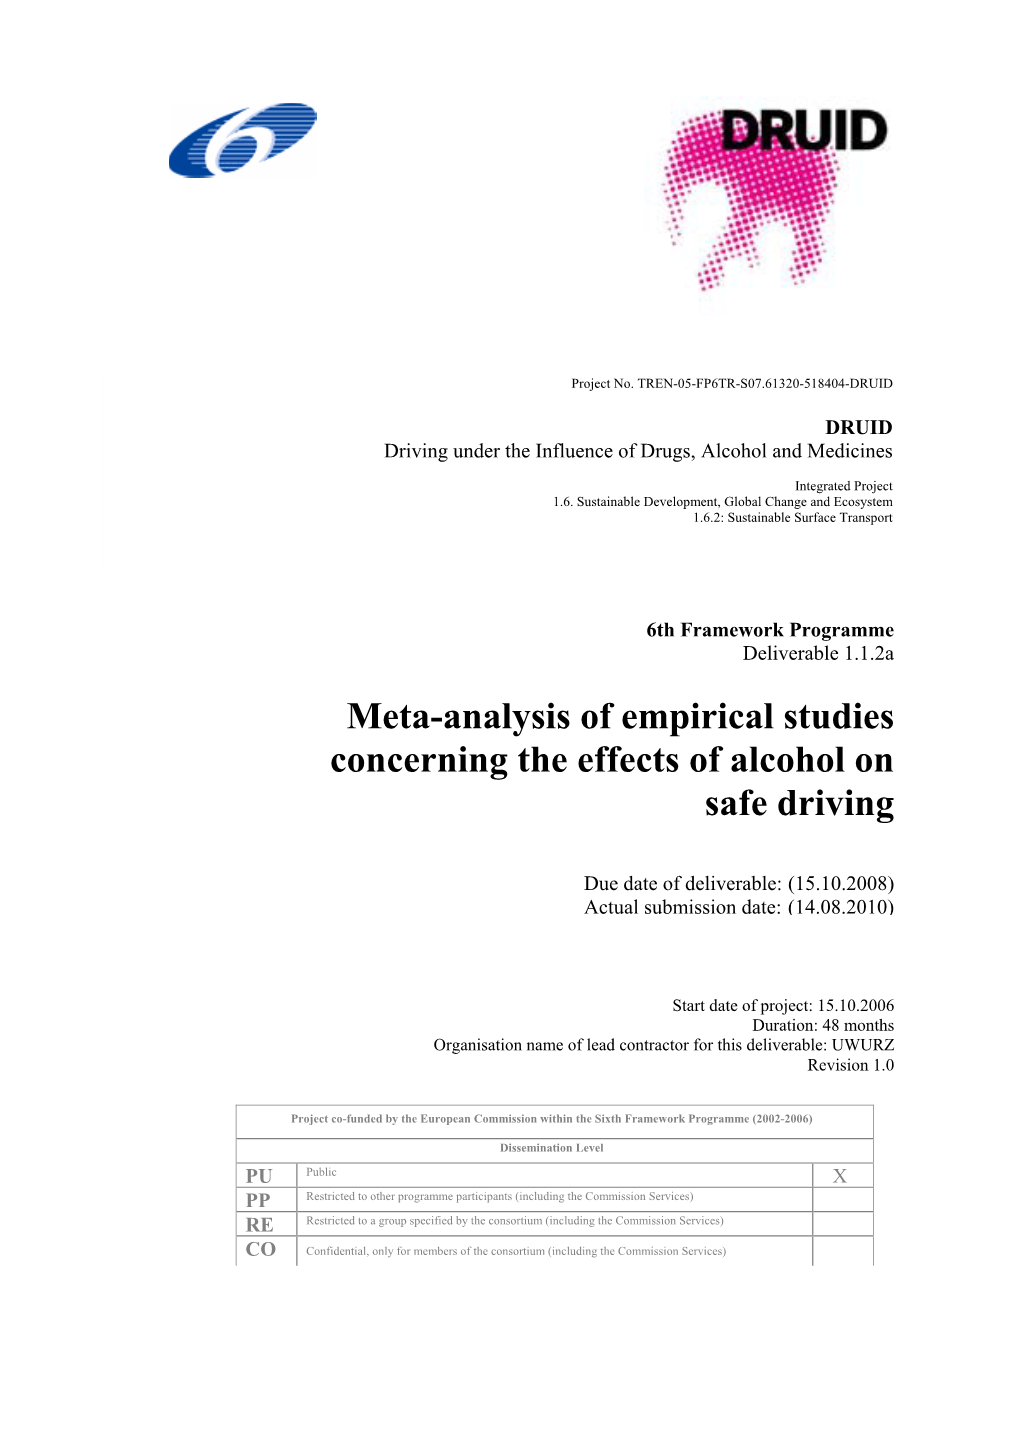 Meta-Analysis of Empirical Studies Concerning the Effects of Alcohol on Safe Driving